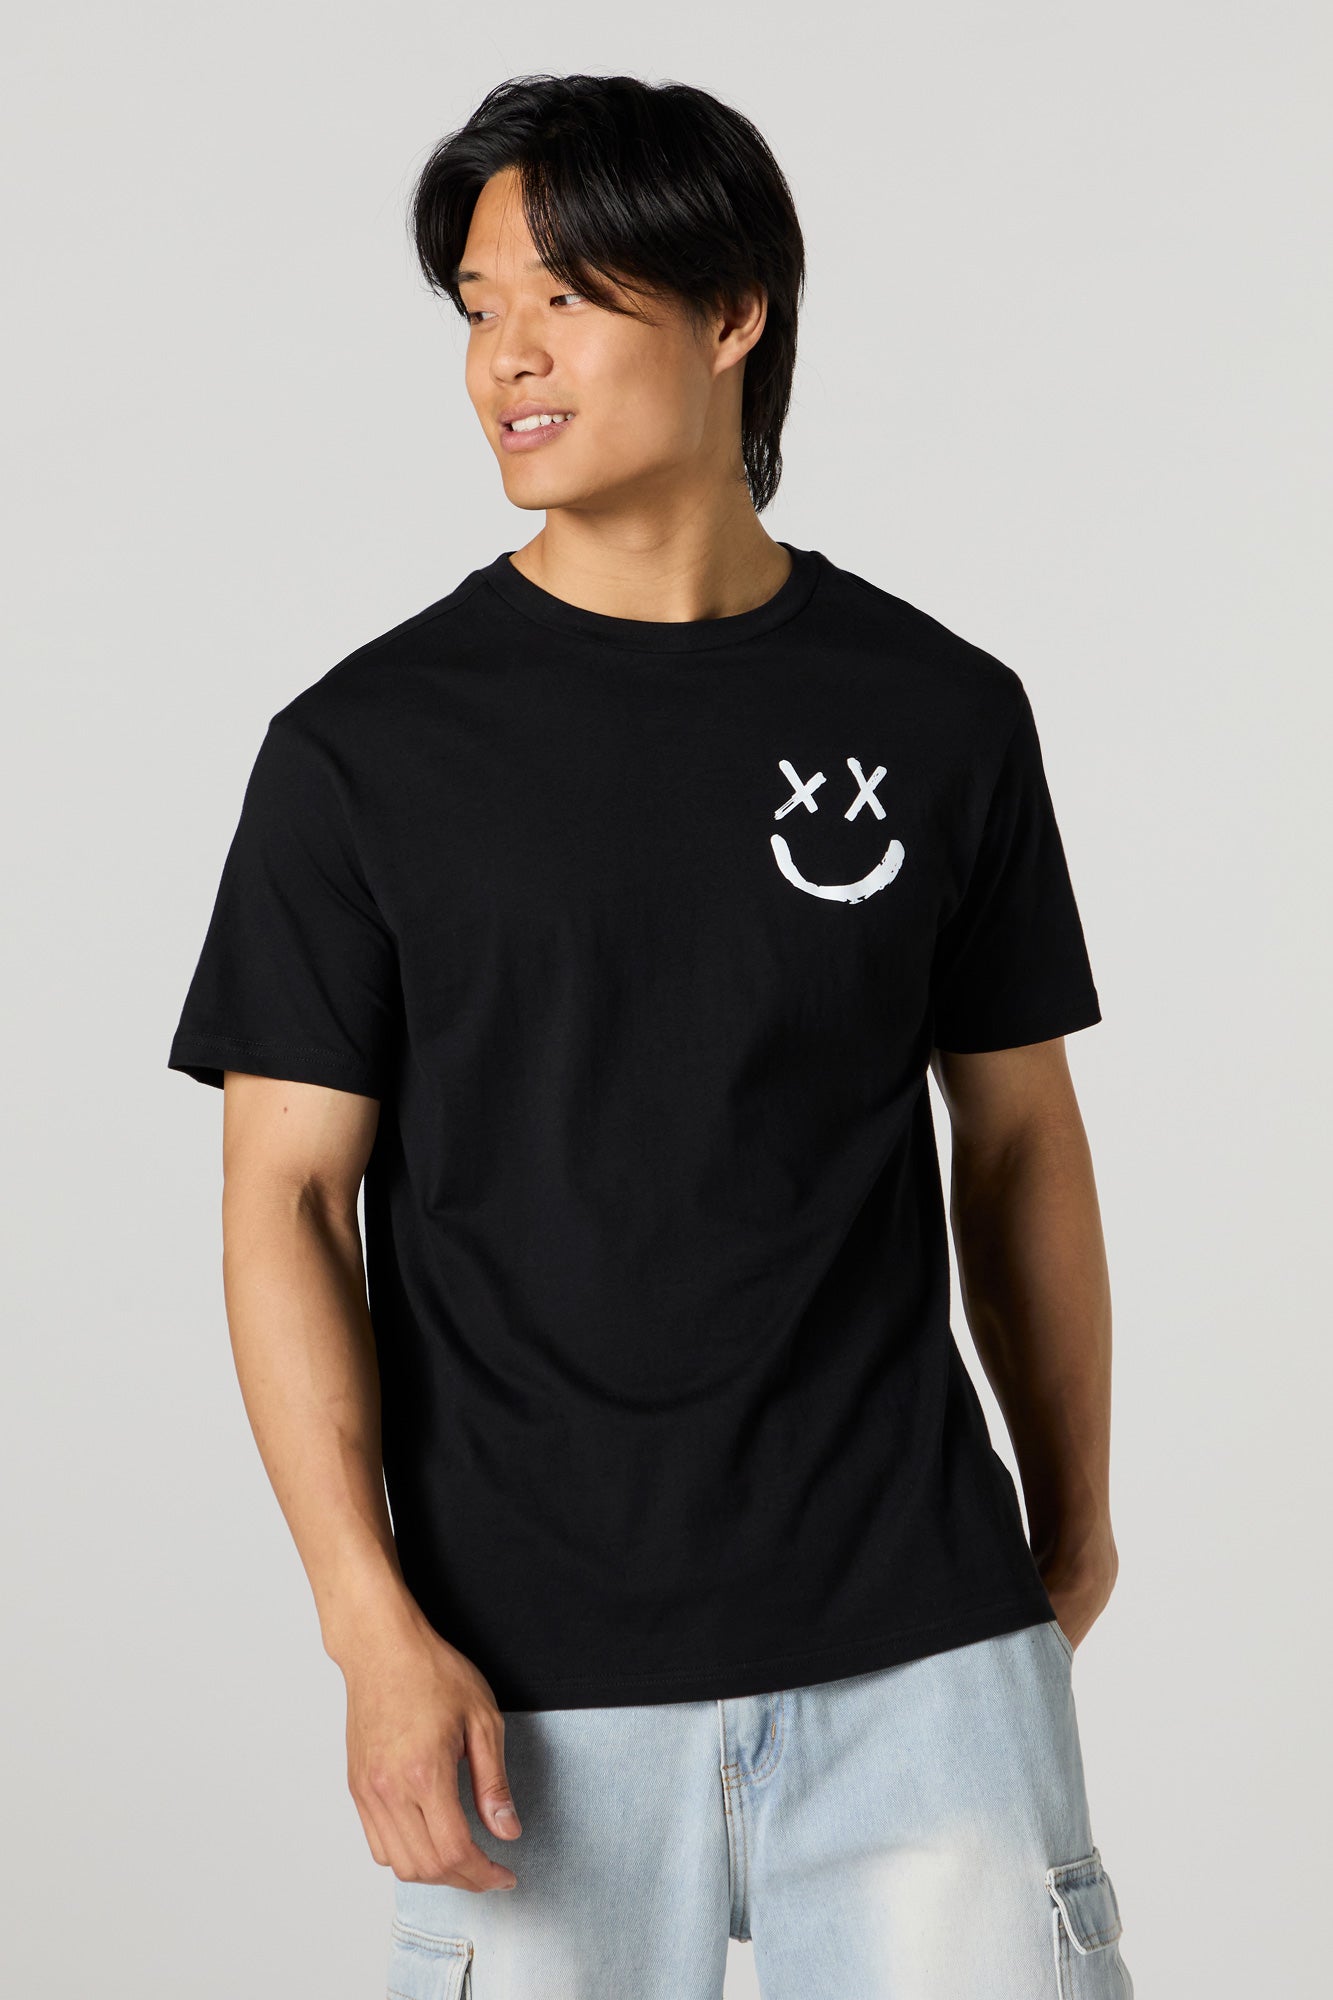 Smiley Face Graphic T-Shirt